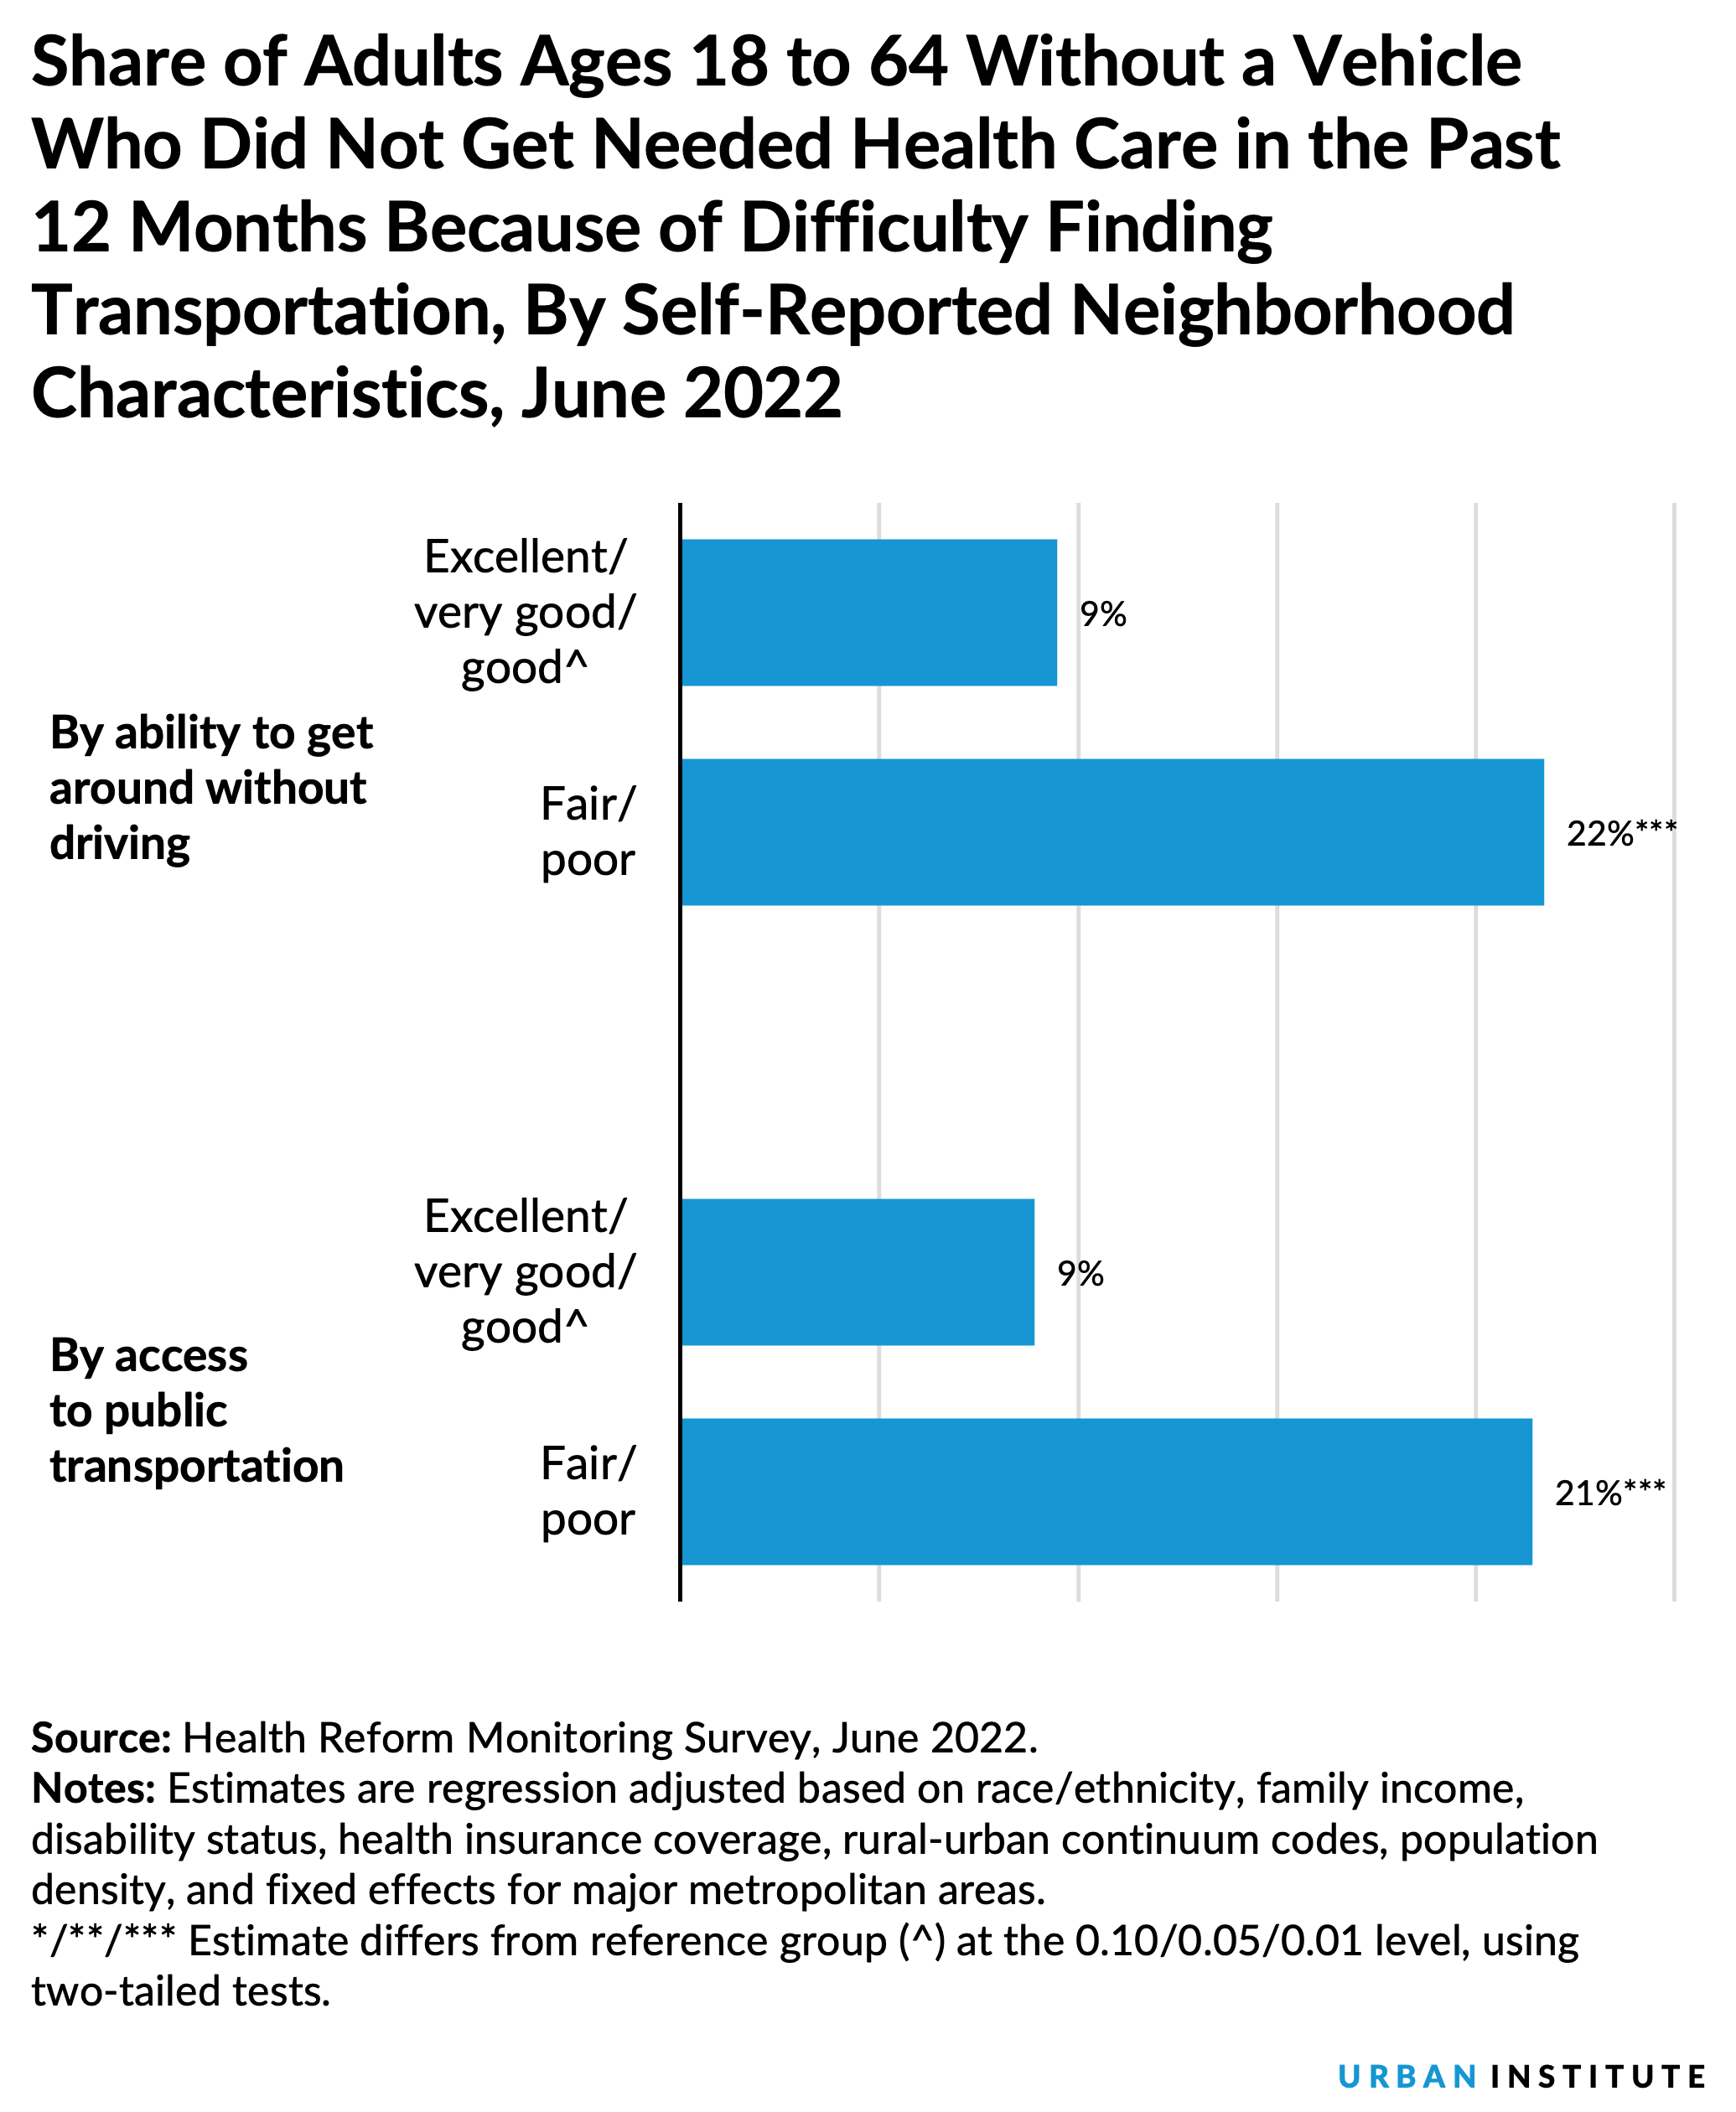 Share of Adults Ages 18 to 64 Without a Vehicle Who Did Not Get Needed Health Care in the Past 12 Months Because of Difficulty Finding Transportation, By Self-Reported Neighborhood Characteristics, June 2022